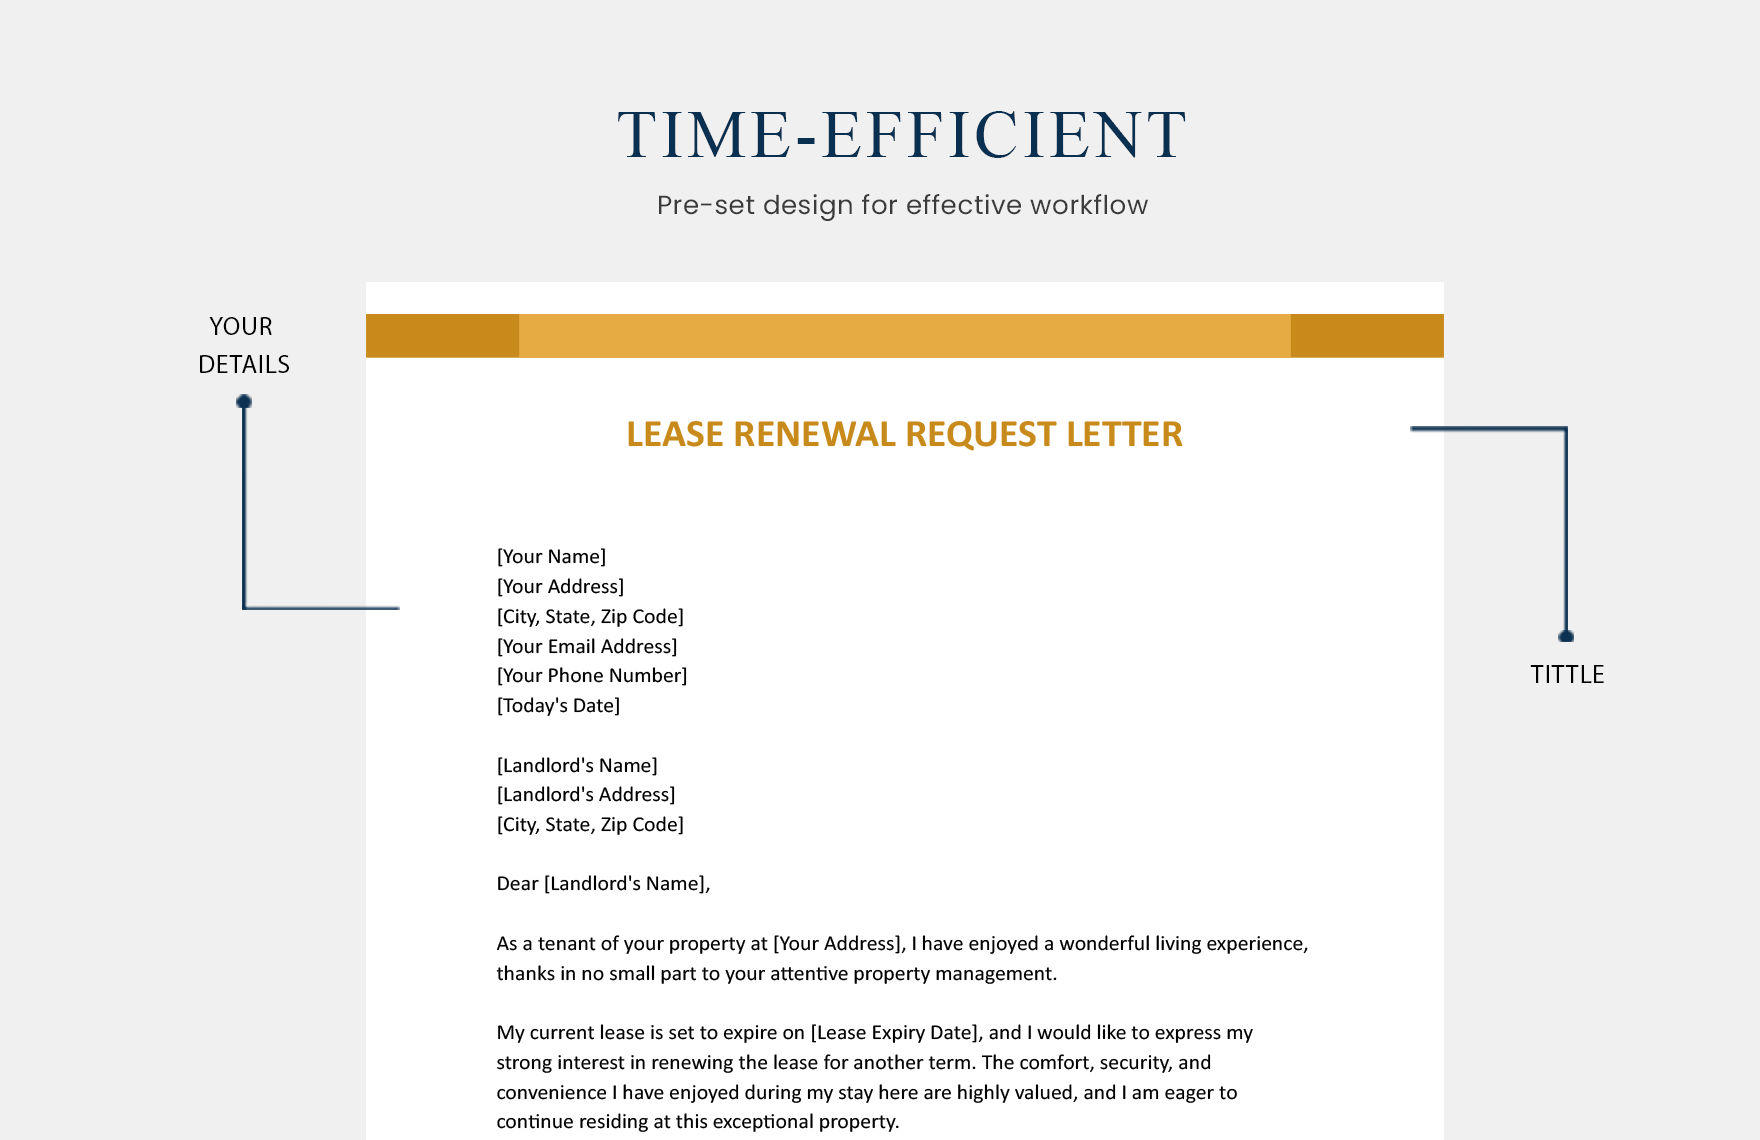 Lease Renewal Request Letter